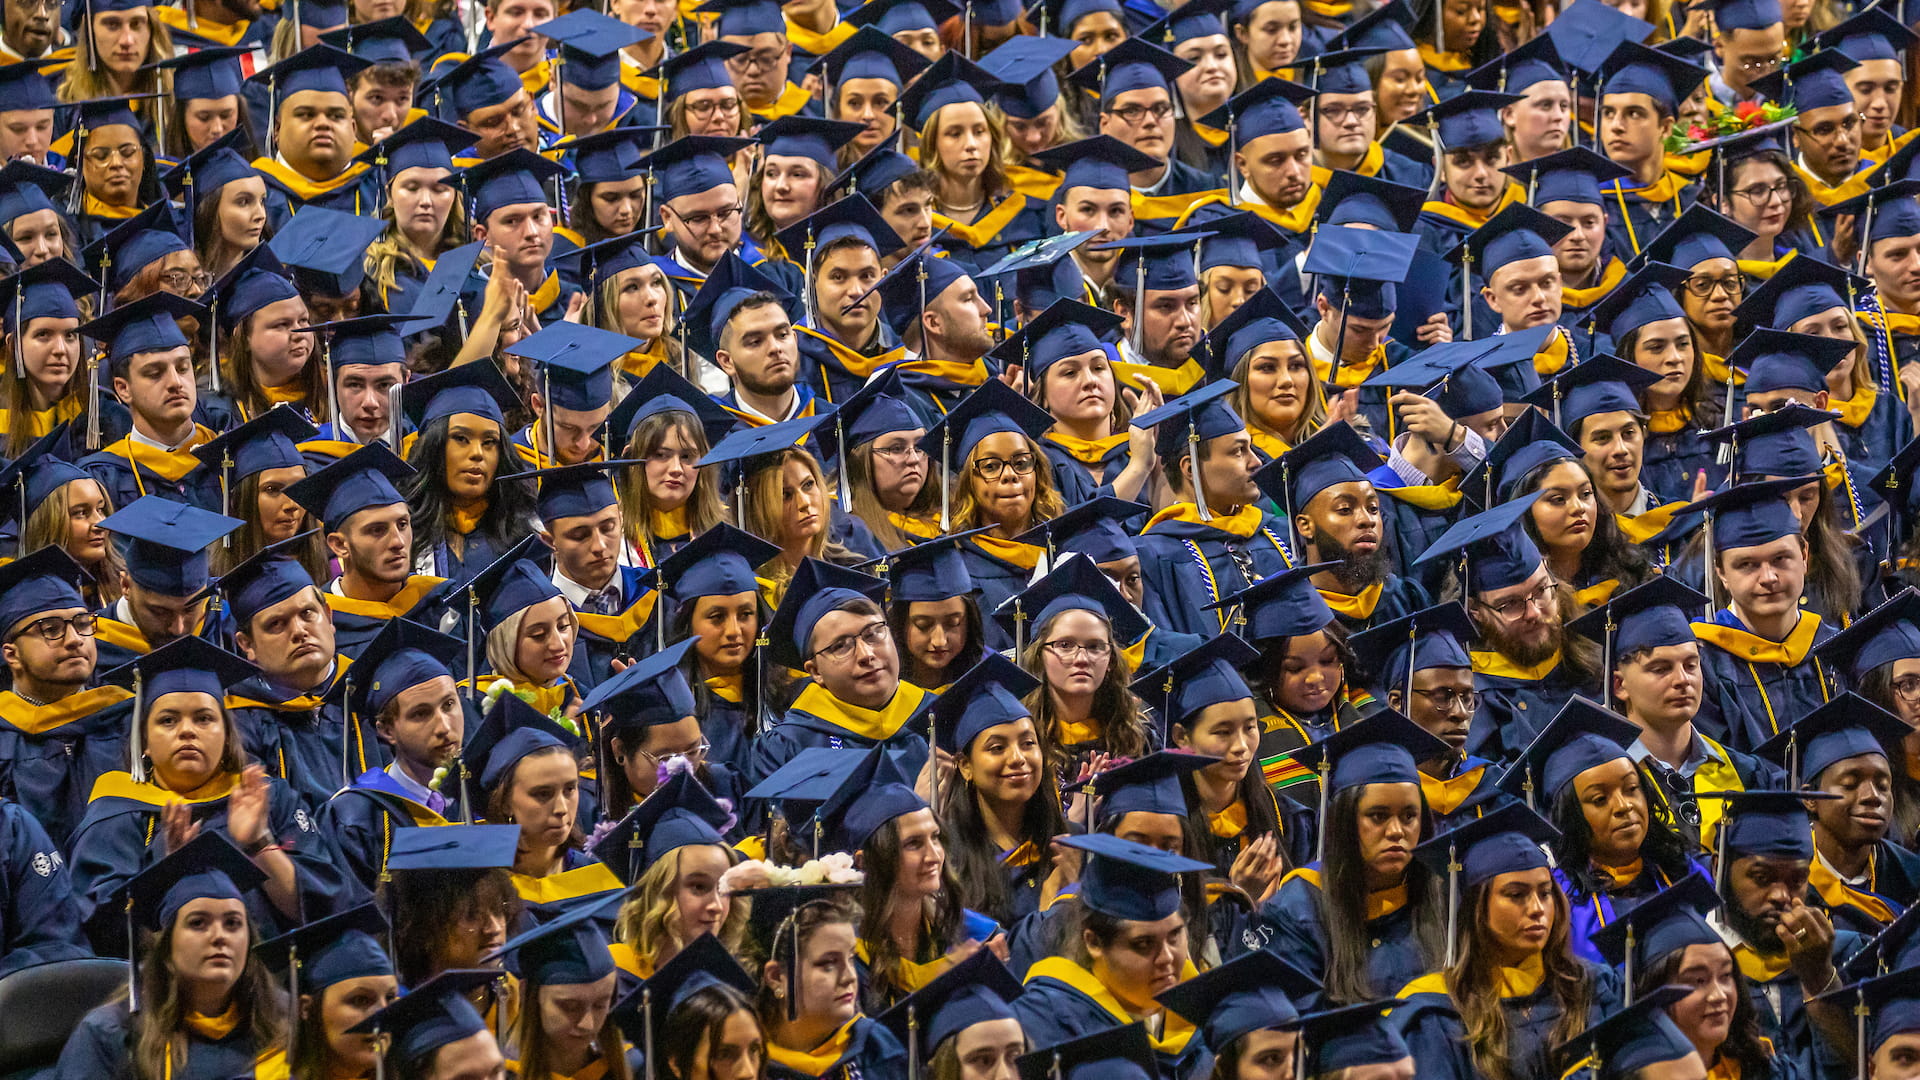 Tight closeup of a crowded sea of faces at the undergraduate Commencement ceremony.